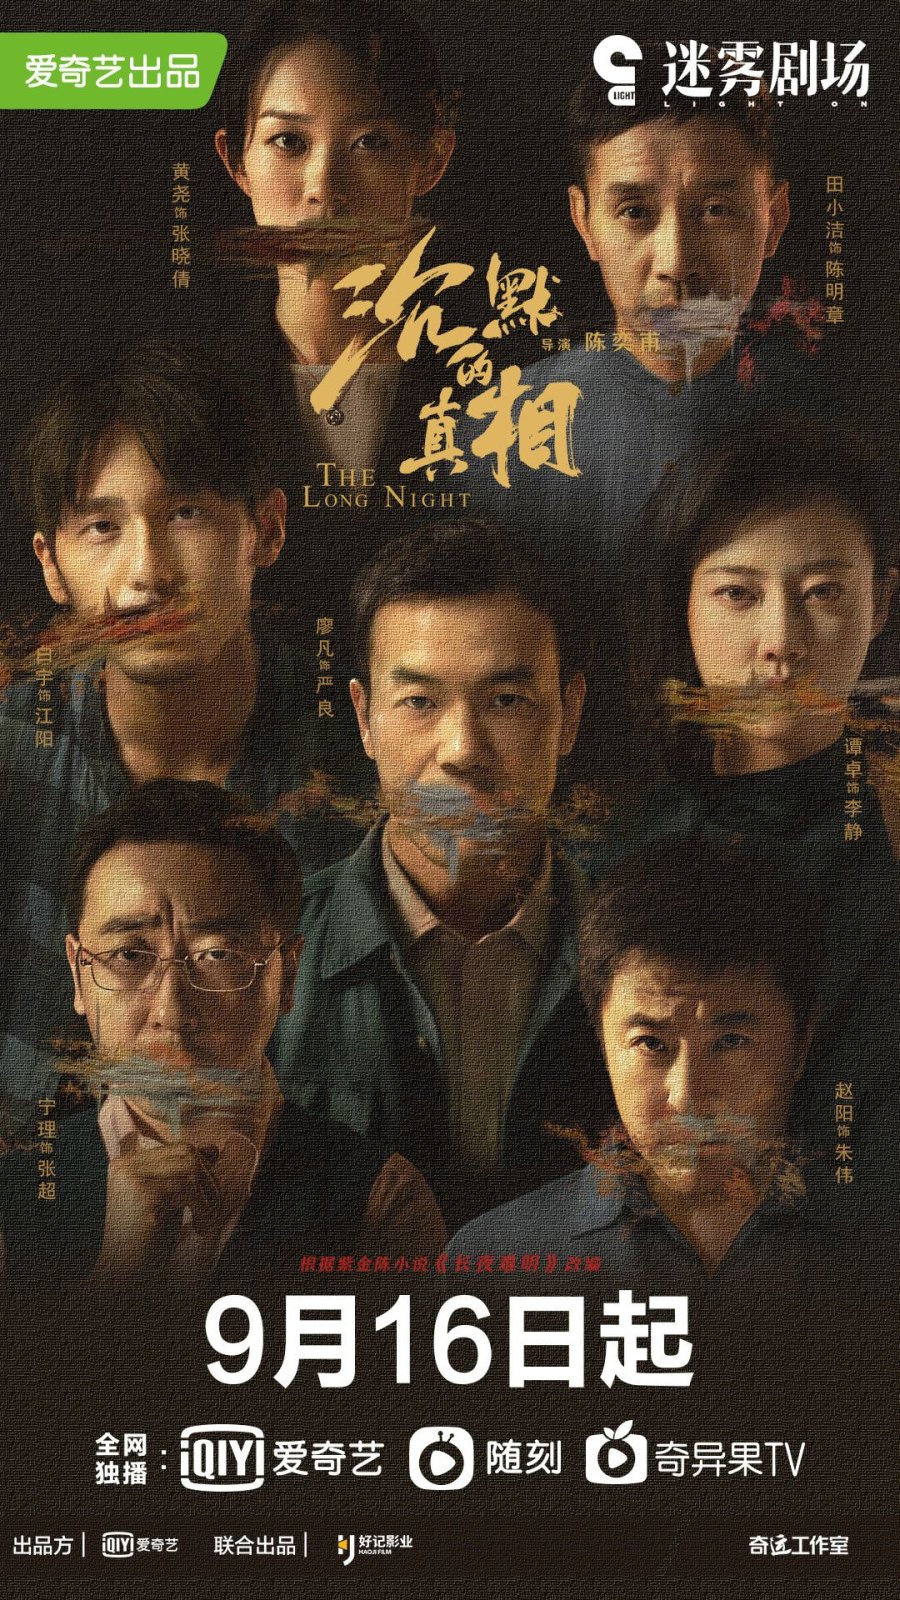 image poster from imdb - ​Light on Series: The Long Night (2020)